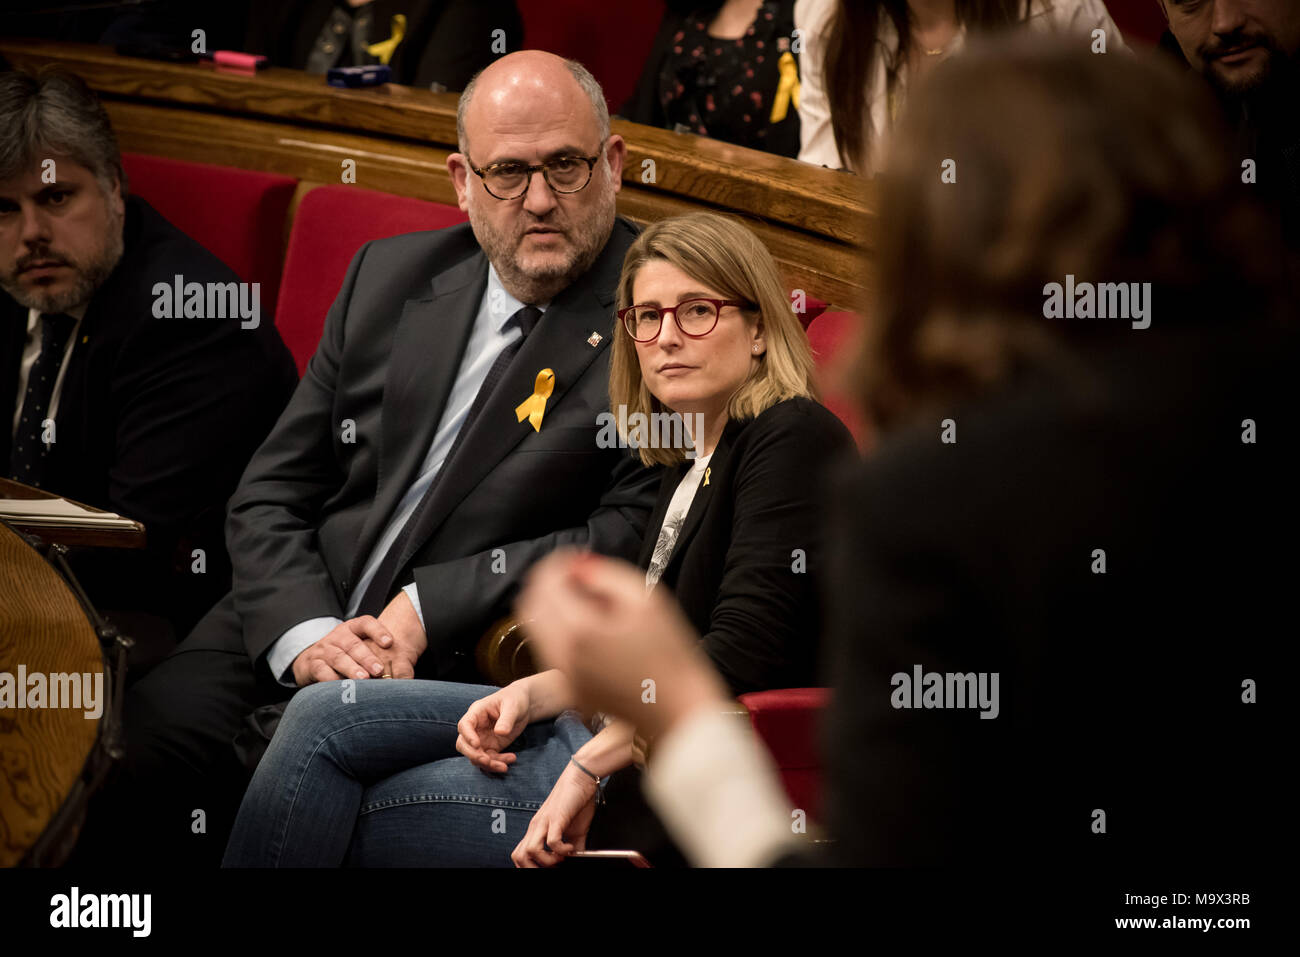 Barcelona, Catalonia, SpainMarch 28, 2018 - Barcelona, Catalonia, Spain -  Junts per Catalunya (JxCAT) members of parliament Eduard Pujol (L) and Elsa Artadi (R) during a parliament session.The independentist parties of the Catalan parliament vindicate the right of Carles Puigdemont to be invested as Catalonia president. Carles Puigdemont is being held by the German authorities after been arrested on an international warrant. Credit:  Jordi Boixareu/Alamy Live News Stock Photo